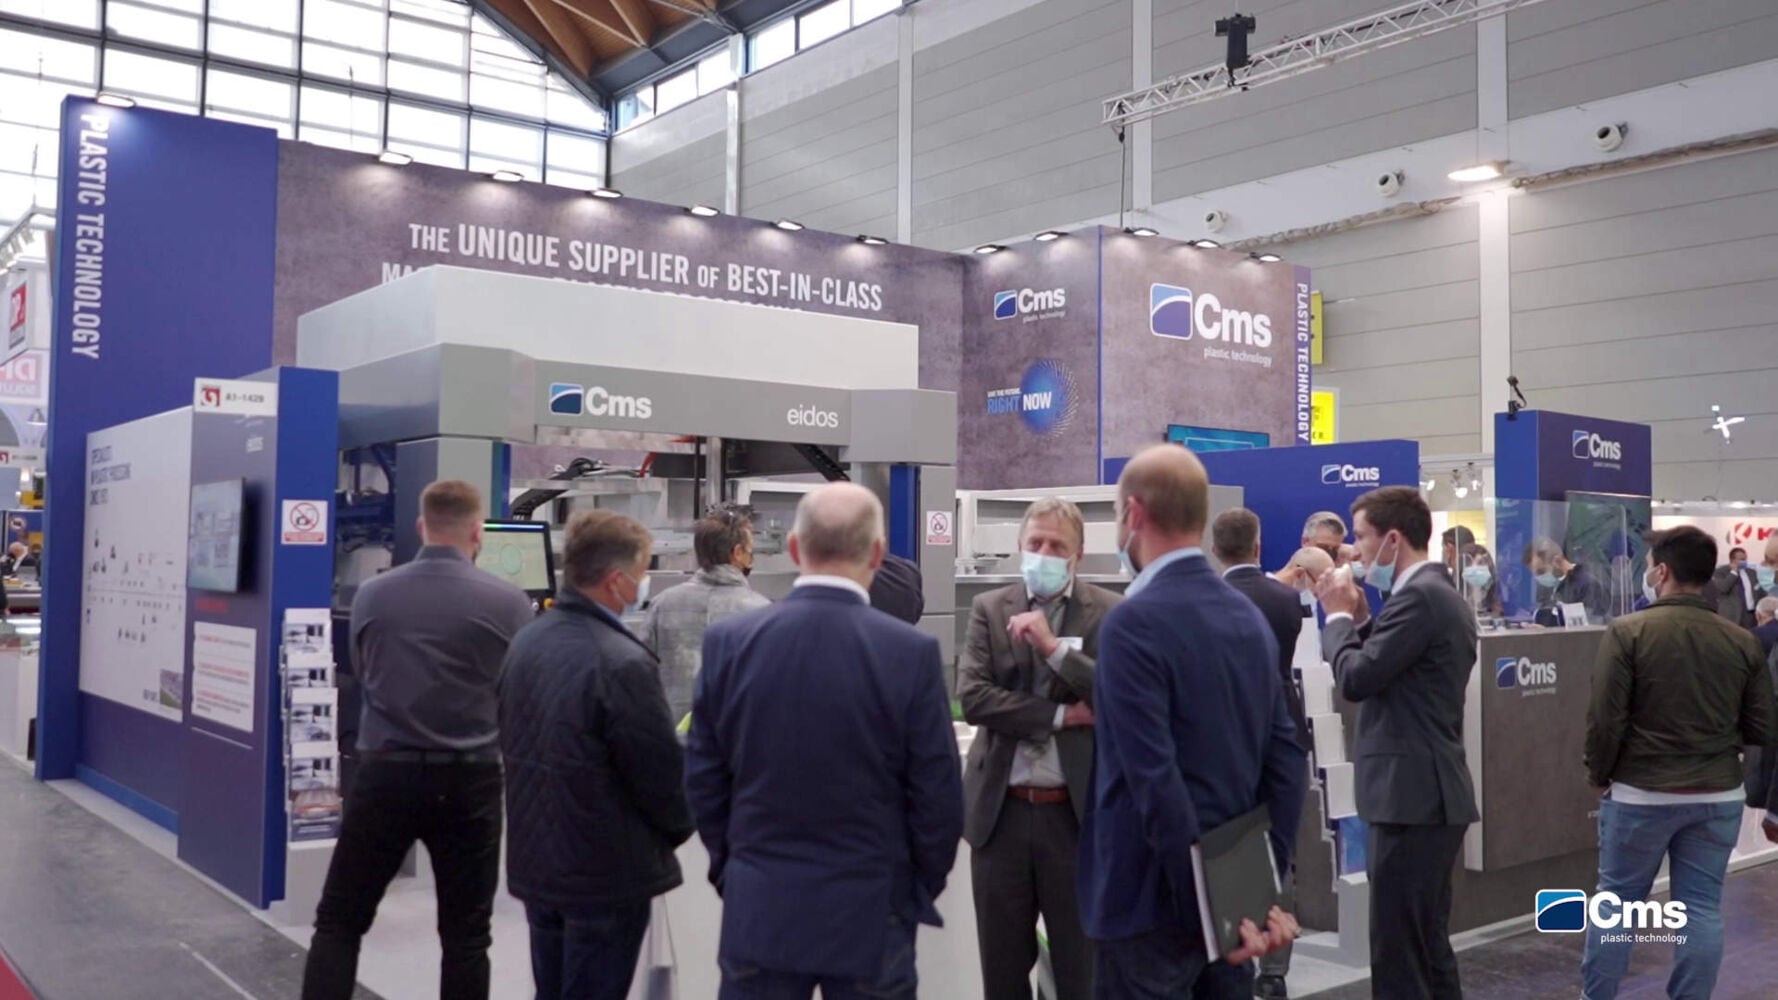 CMS at Fakuma 2021: the video, the team and what’s new